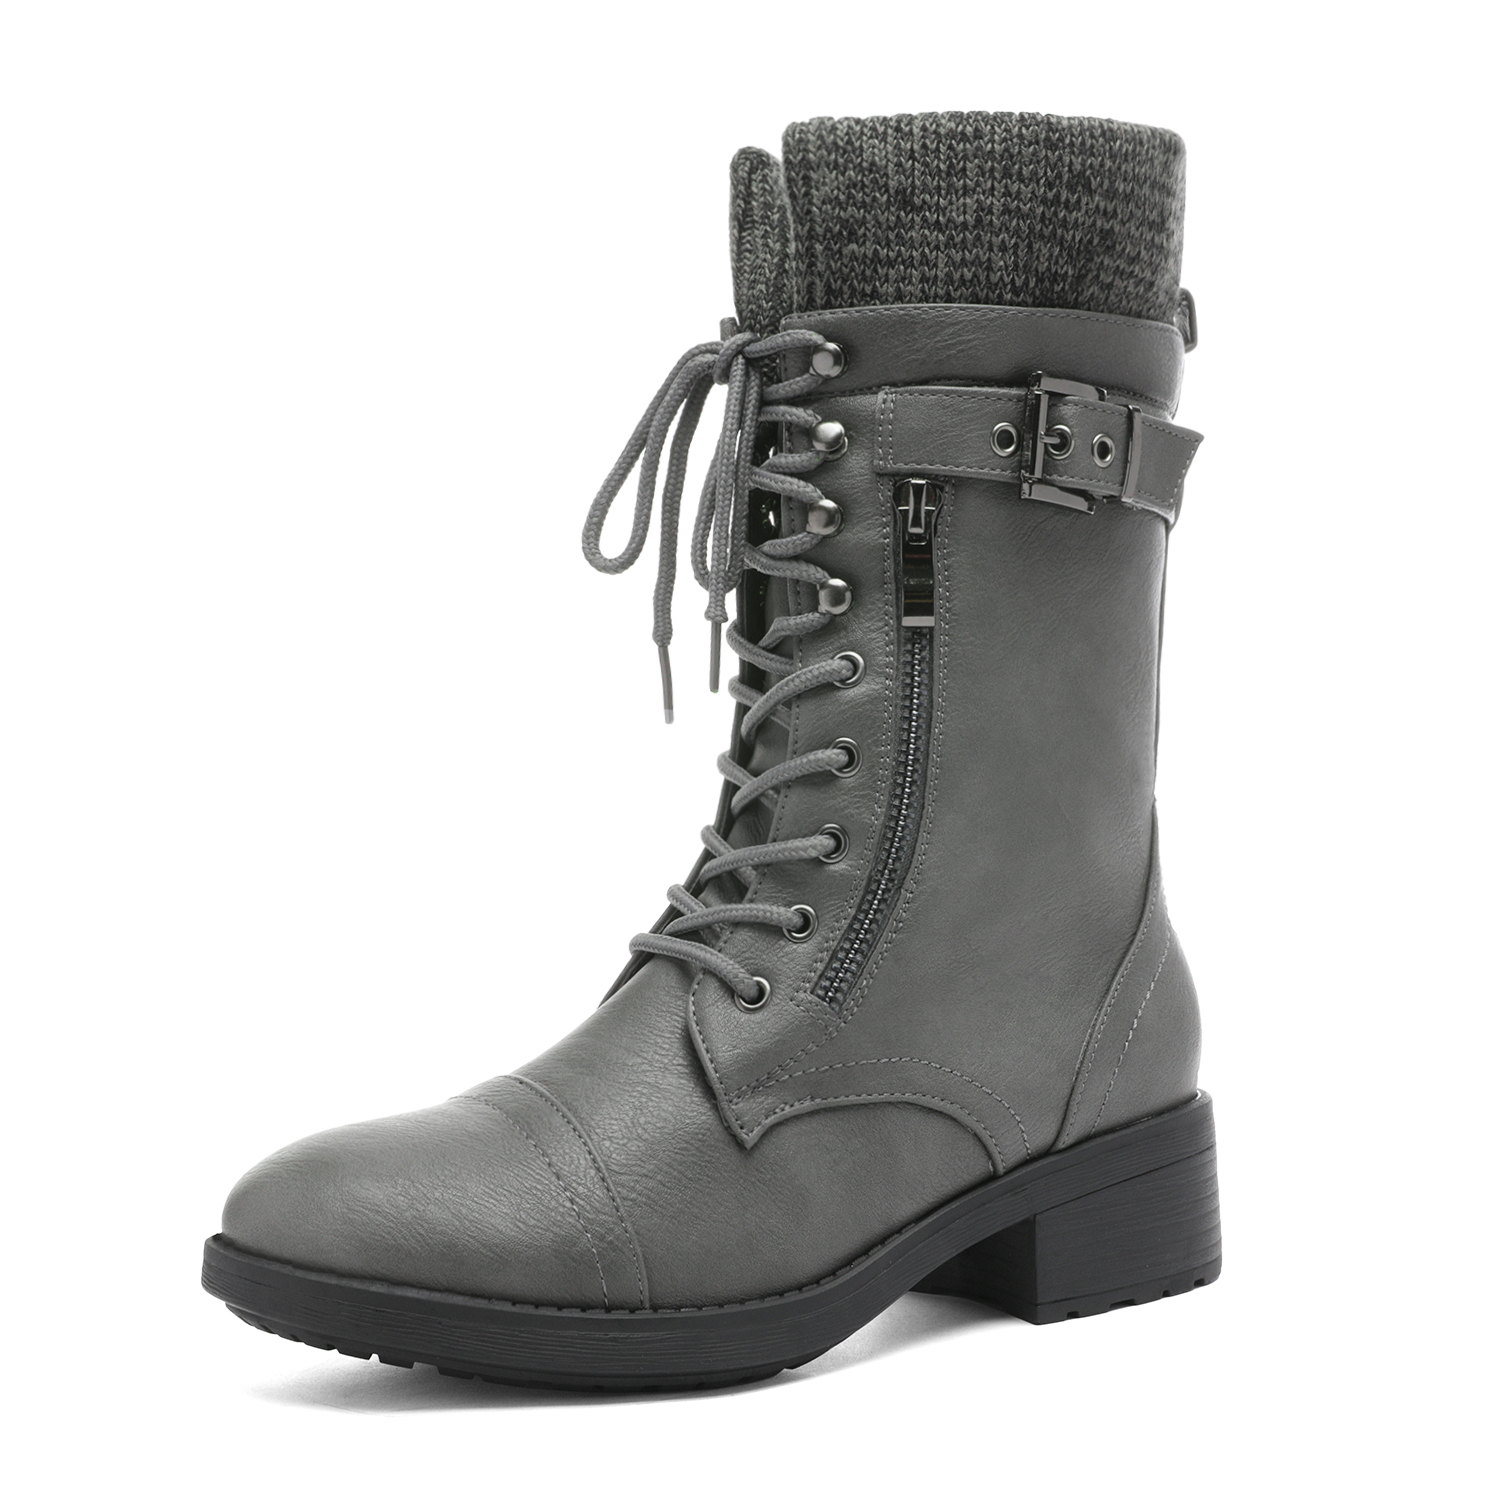 DREAM PAIRS Womens Winter Lace up Mid Calf Combat Riding Military Boots